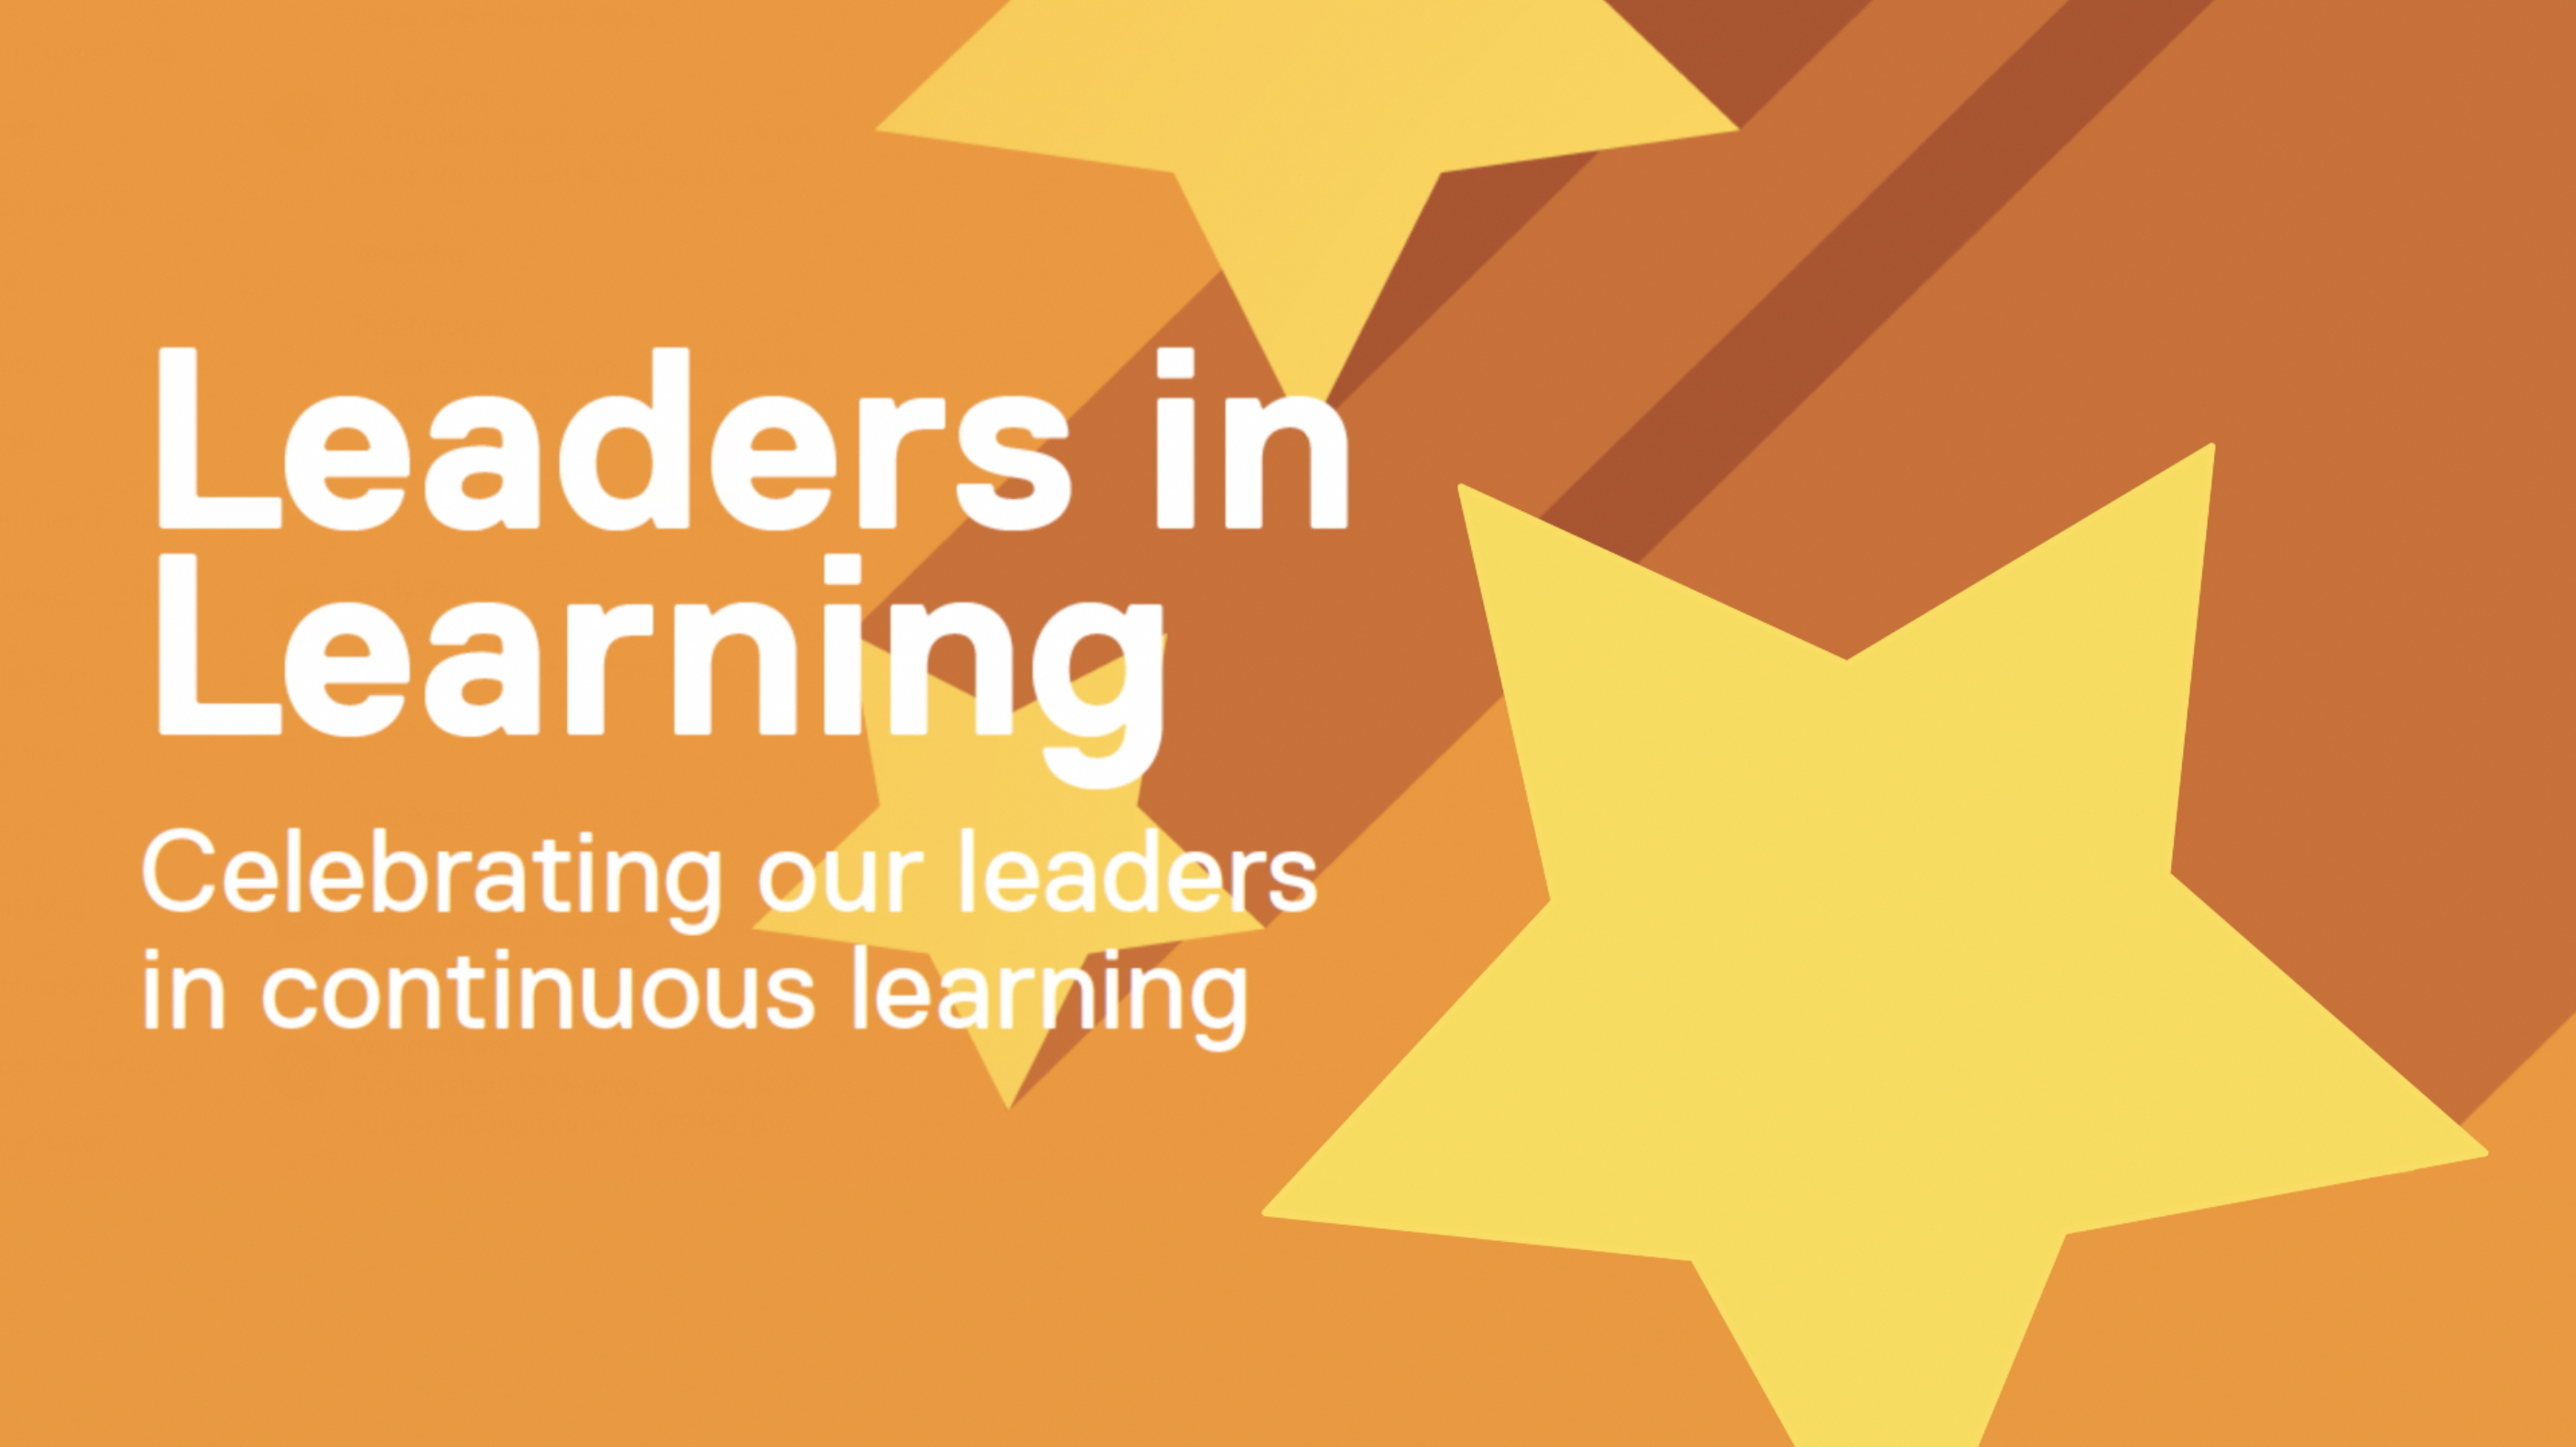 Leaders in Learning: celebrating our leaders in continuous learning